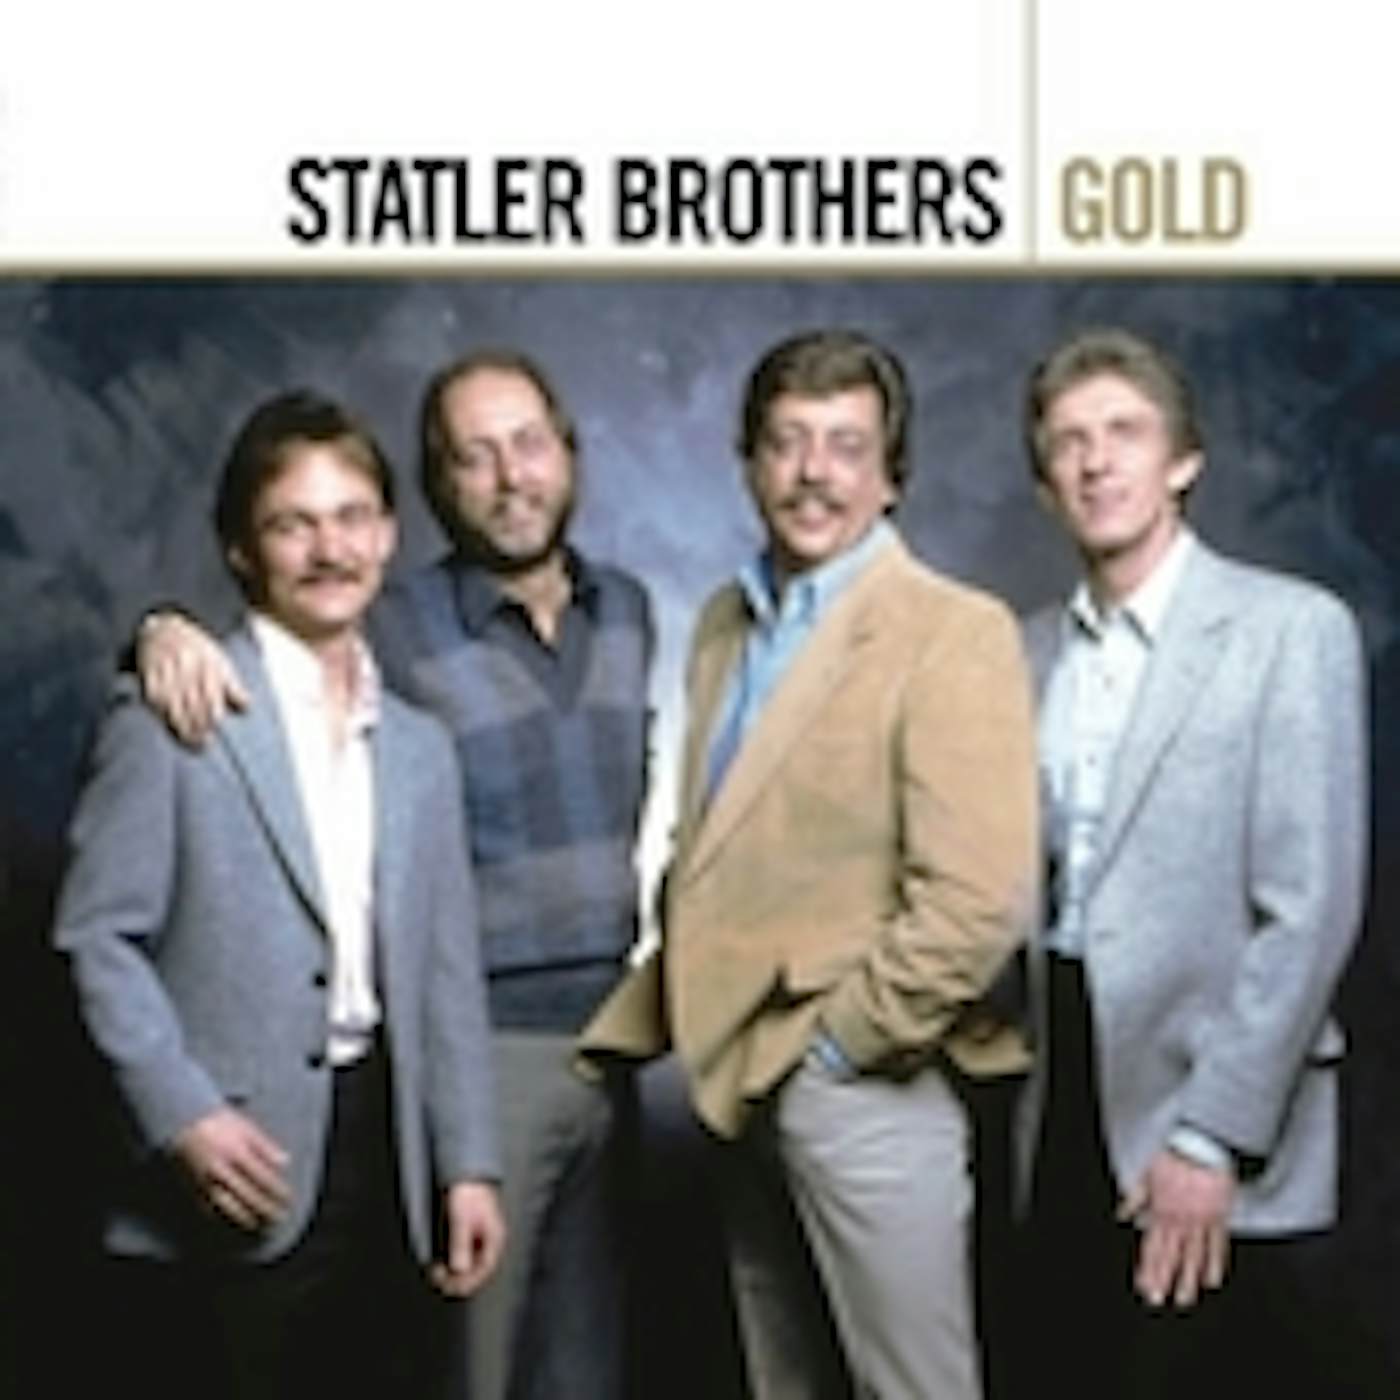 The Statler Brothers GOLD CD